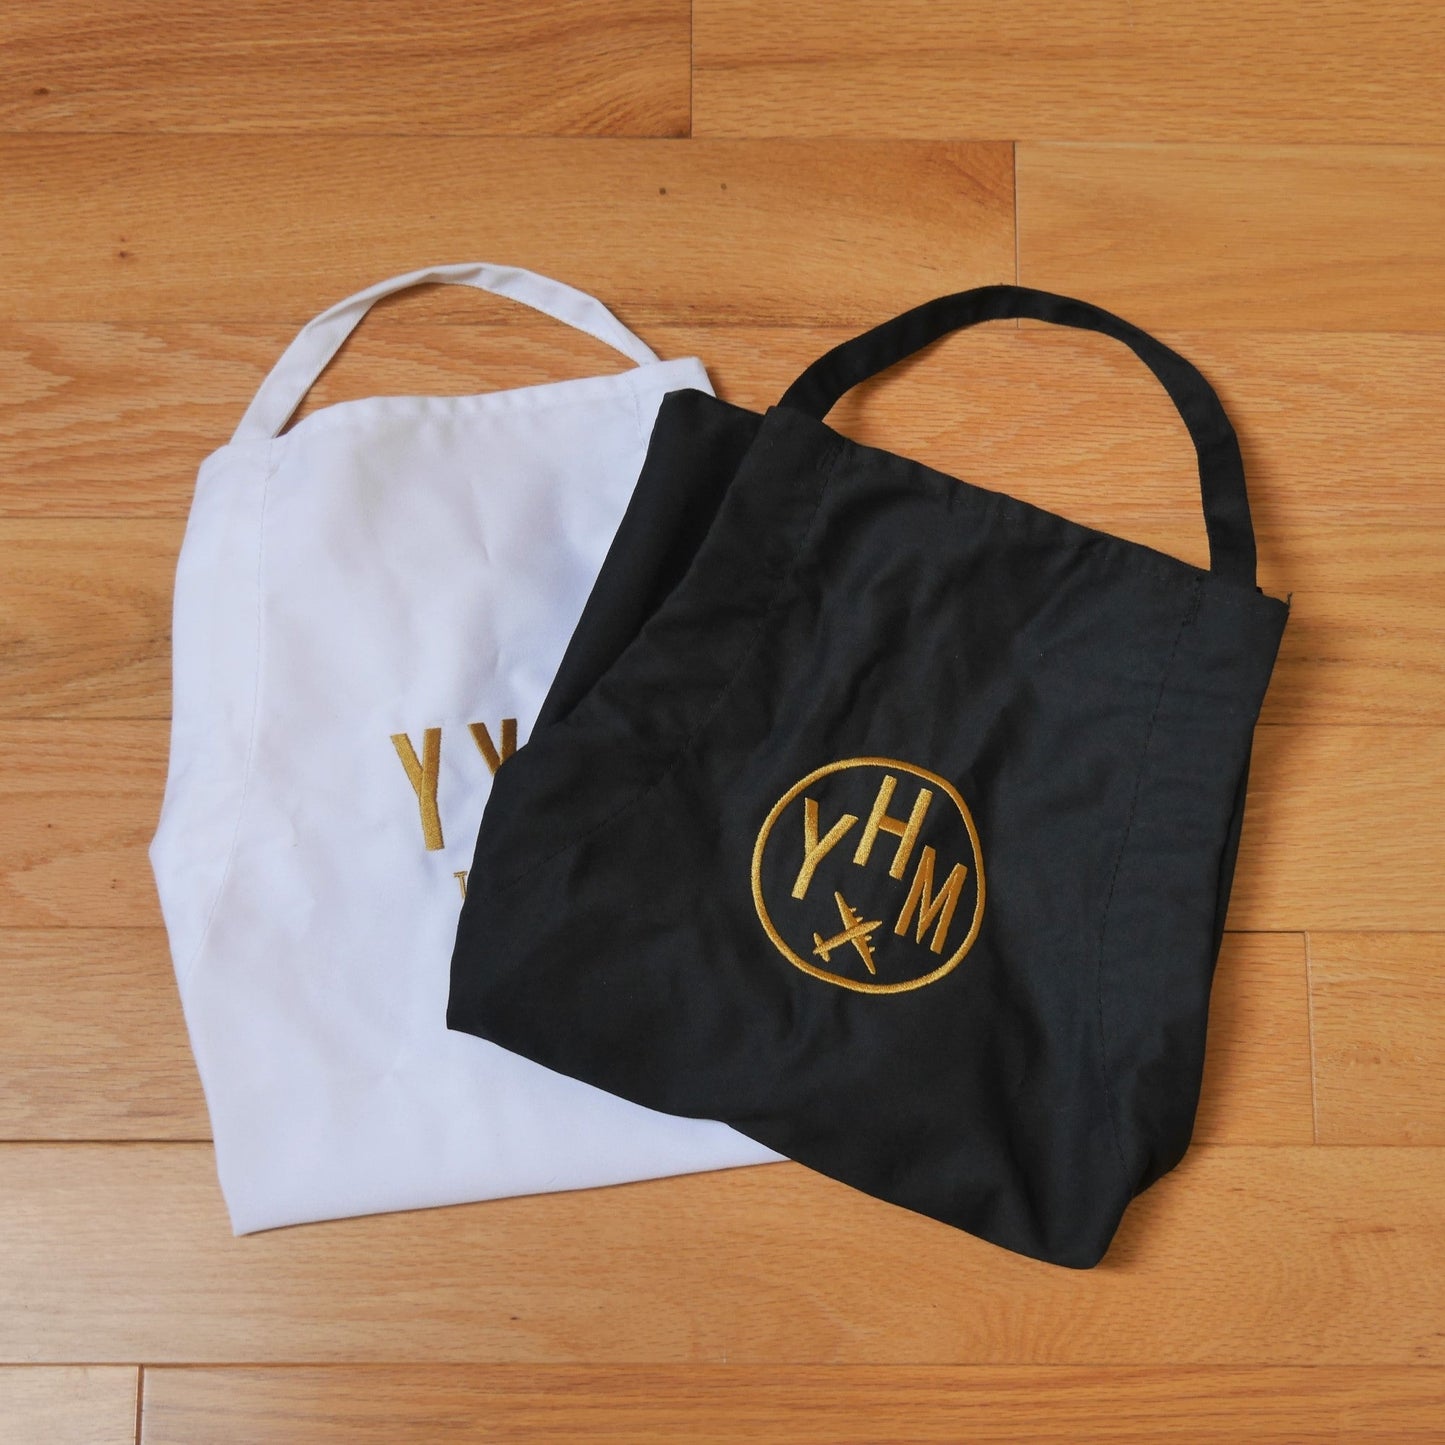 City Embroidered Apron - Old Gold • VIE Vienna • YHM Designs - Image 14